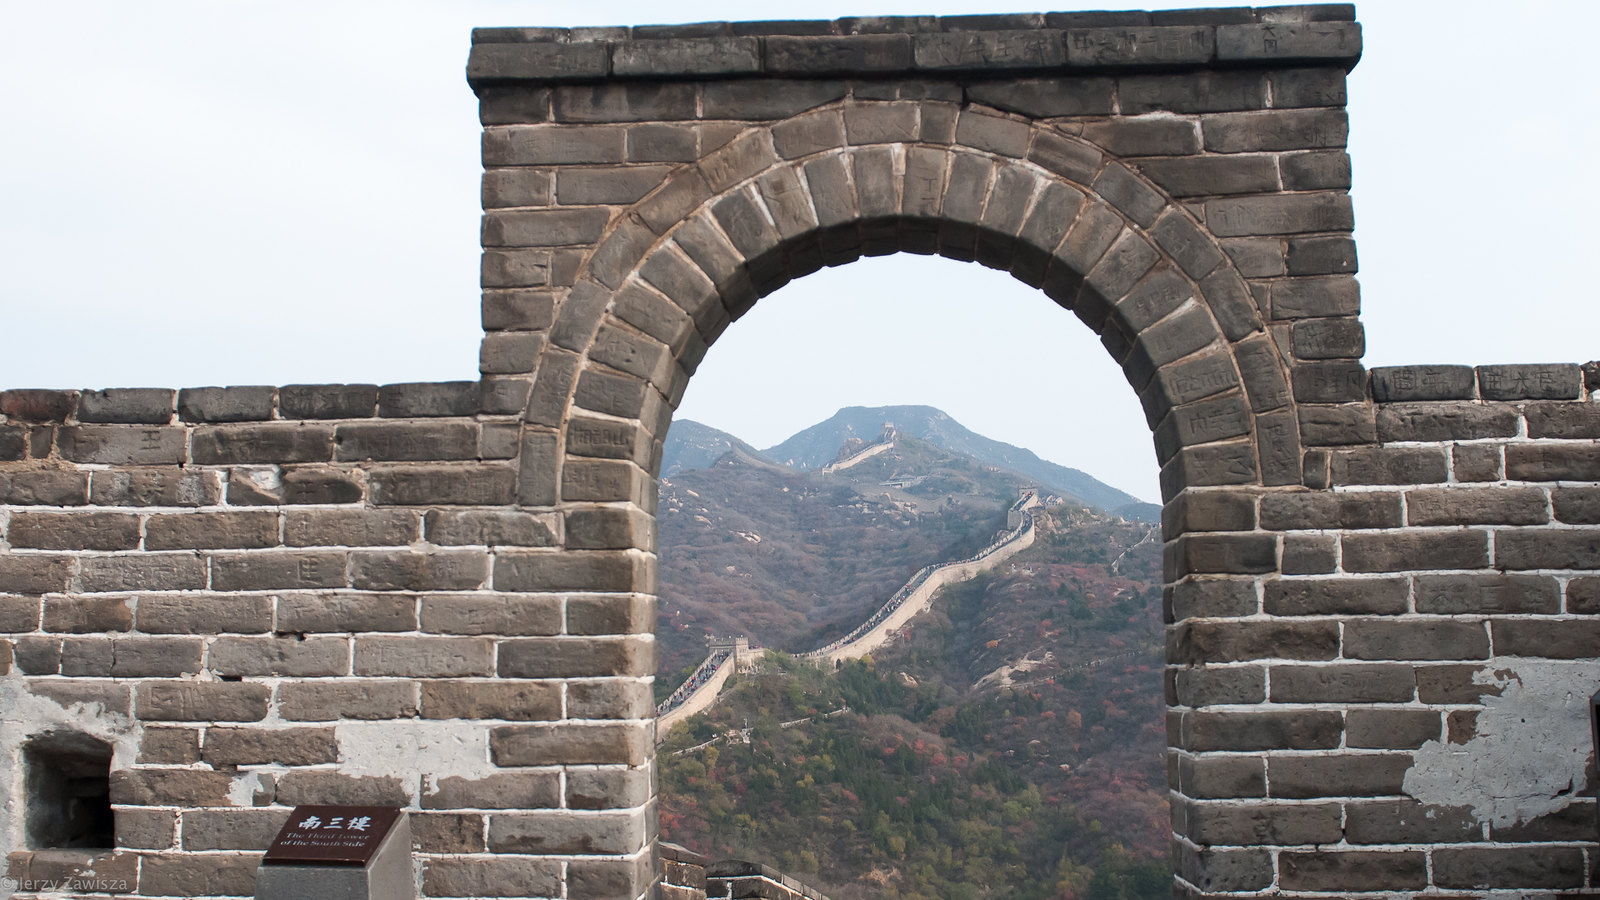 The Great Wall of China as seen through a stone arch.